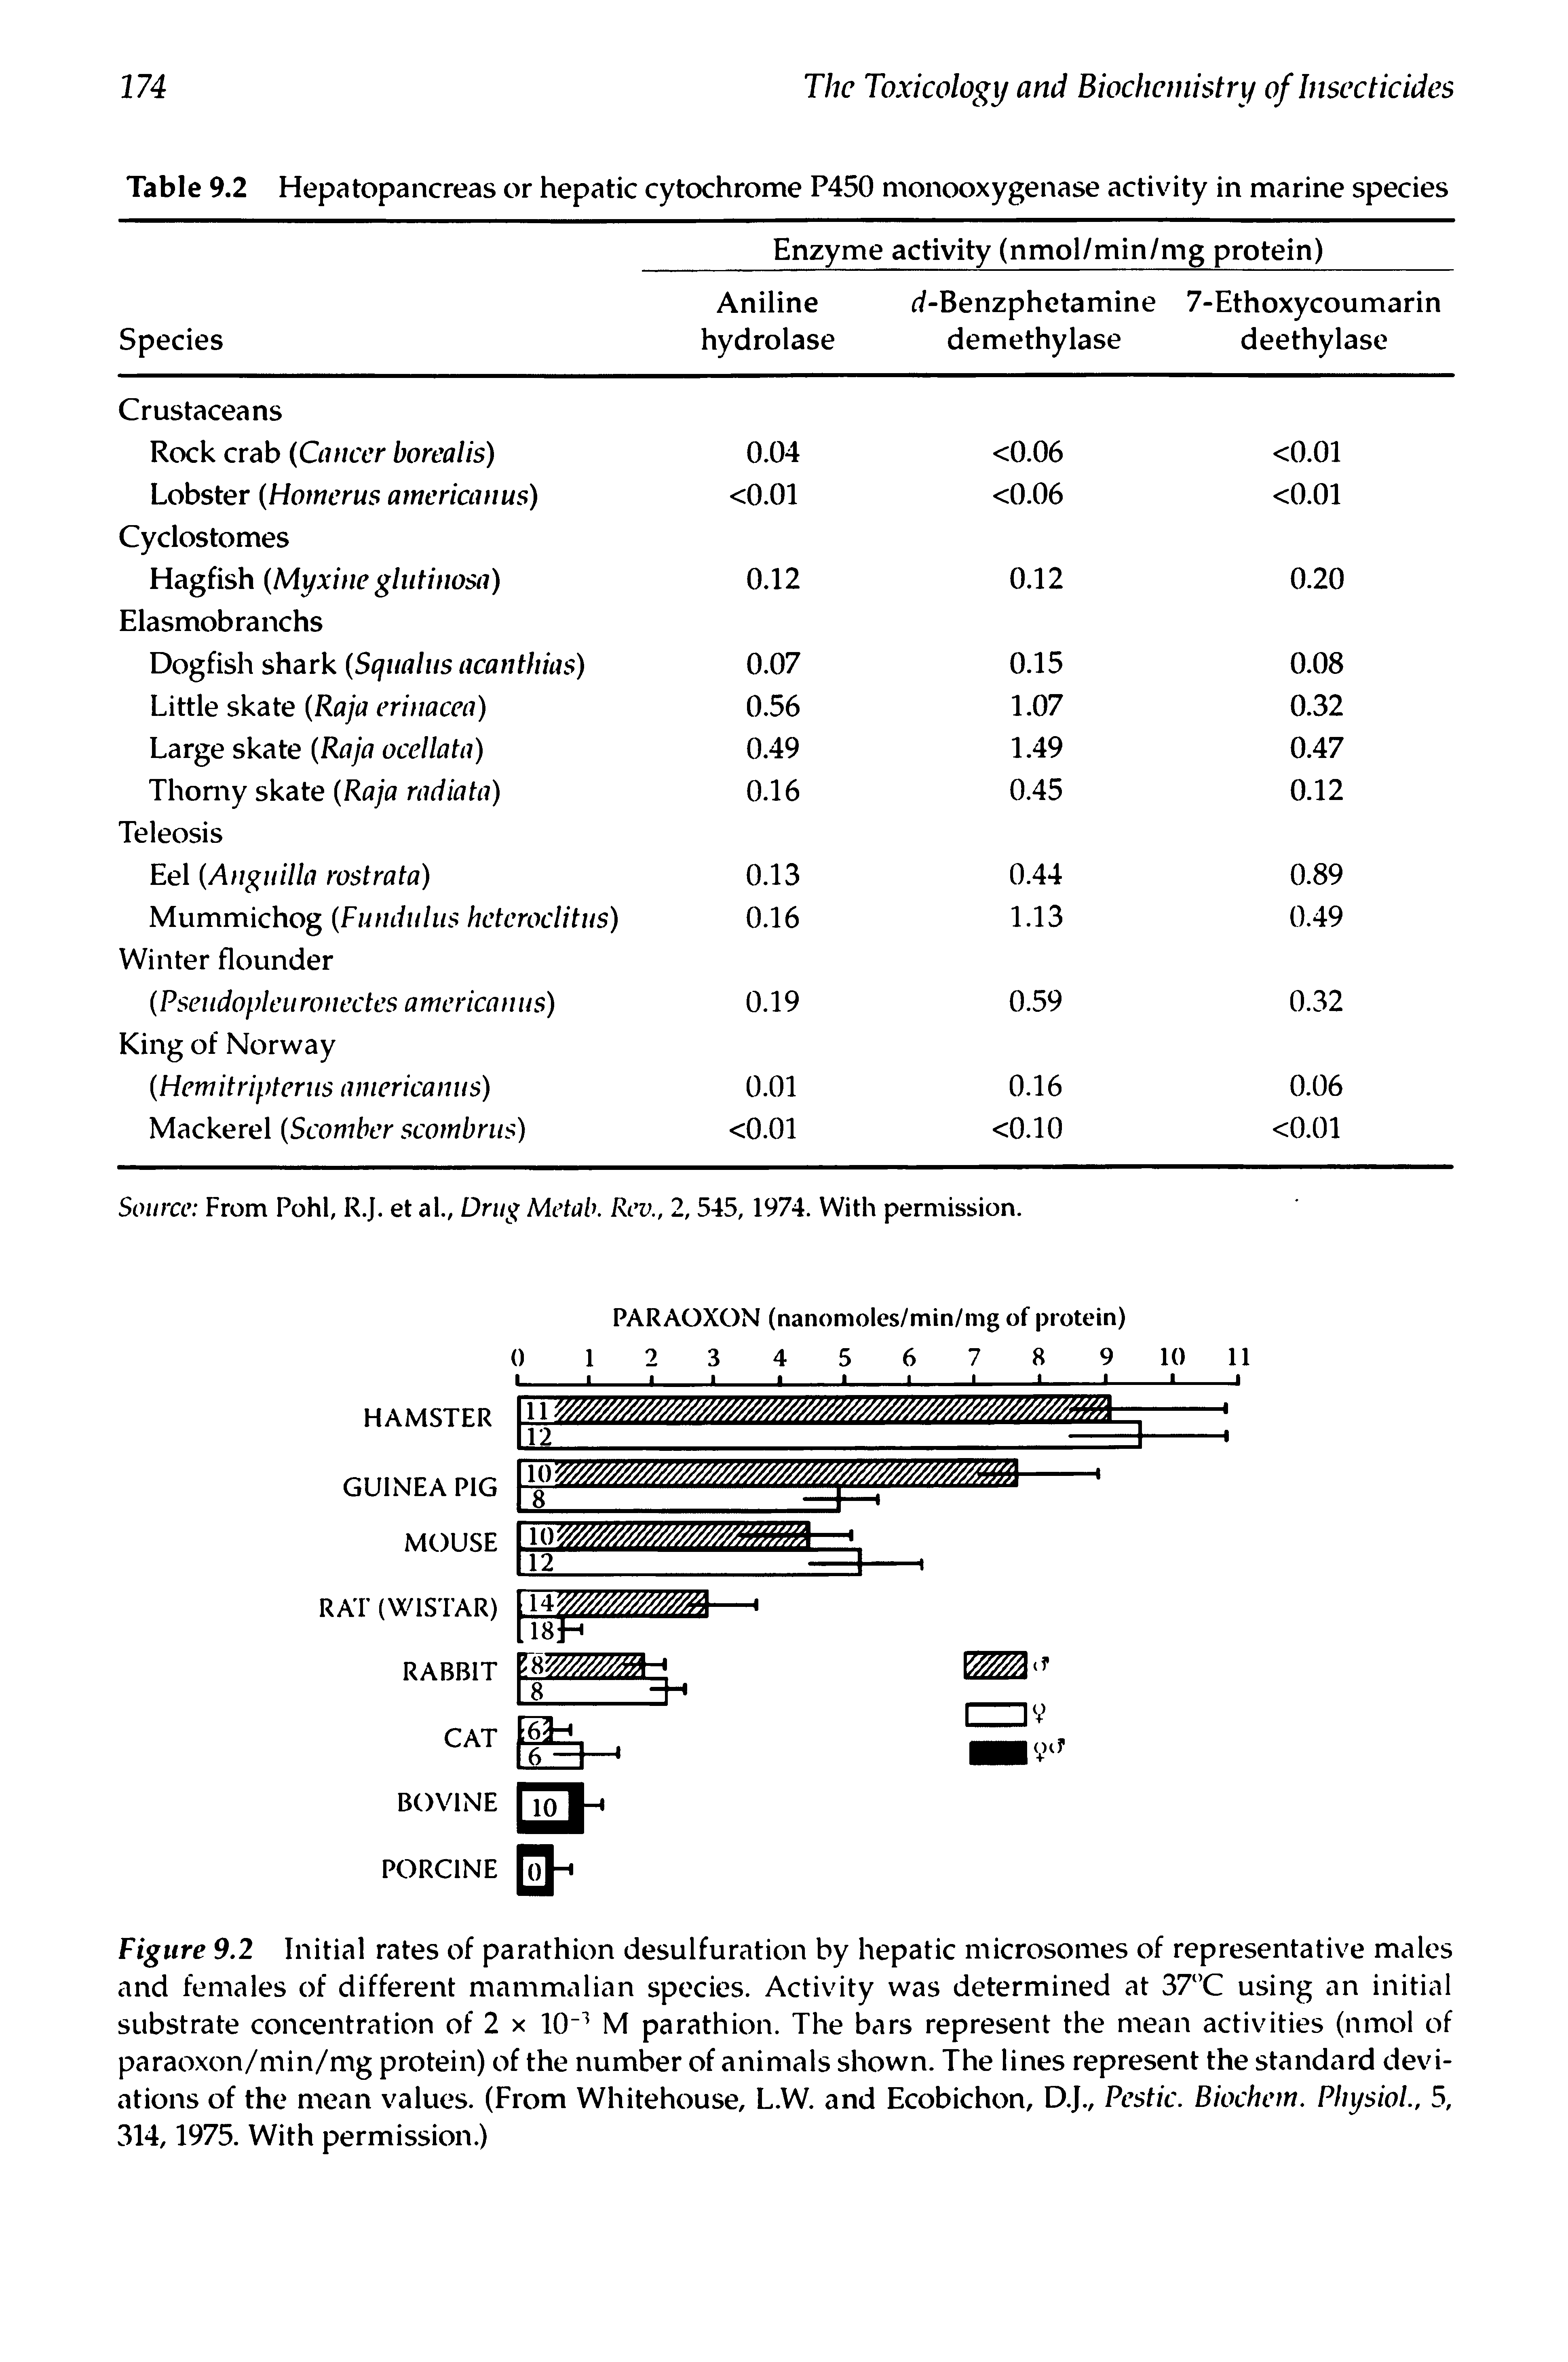 Figure 9.2 Initial rates of parathion desulfuration by hepatic microsomes of representative males and females of different mammalian species. Activity was determined at 37°C using an initial substrate concentration of 2 x 10 1 M parathion. The bars represent the mean activities (nmol of paraoxon/min/mg protein) of the number of animals shown. The lines represent the standard deviations of the mean values. (From Whitehouse, L.W. and Ecobichon, D.J., Pestic. Biochem. Physiol., 5, 314,1975. With permission.)...